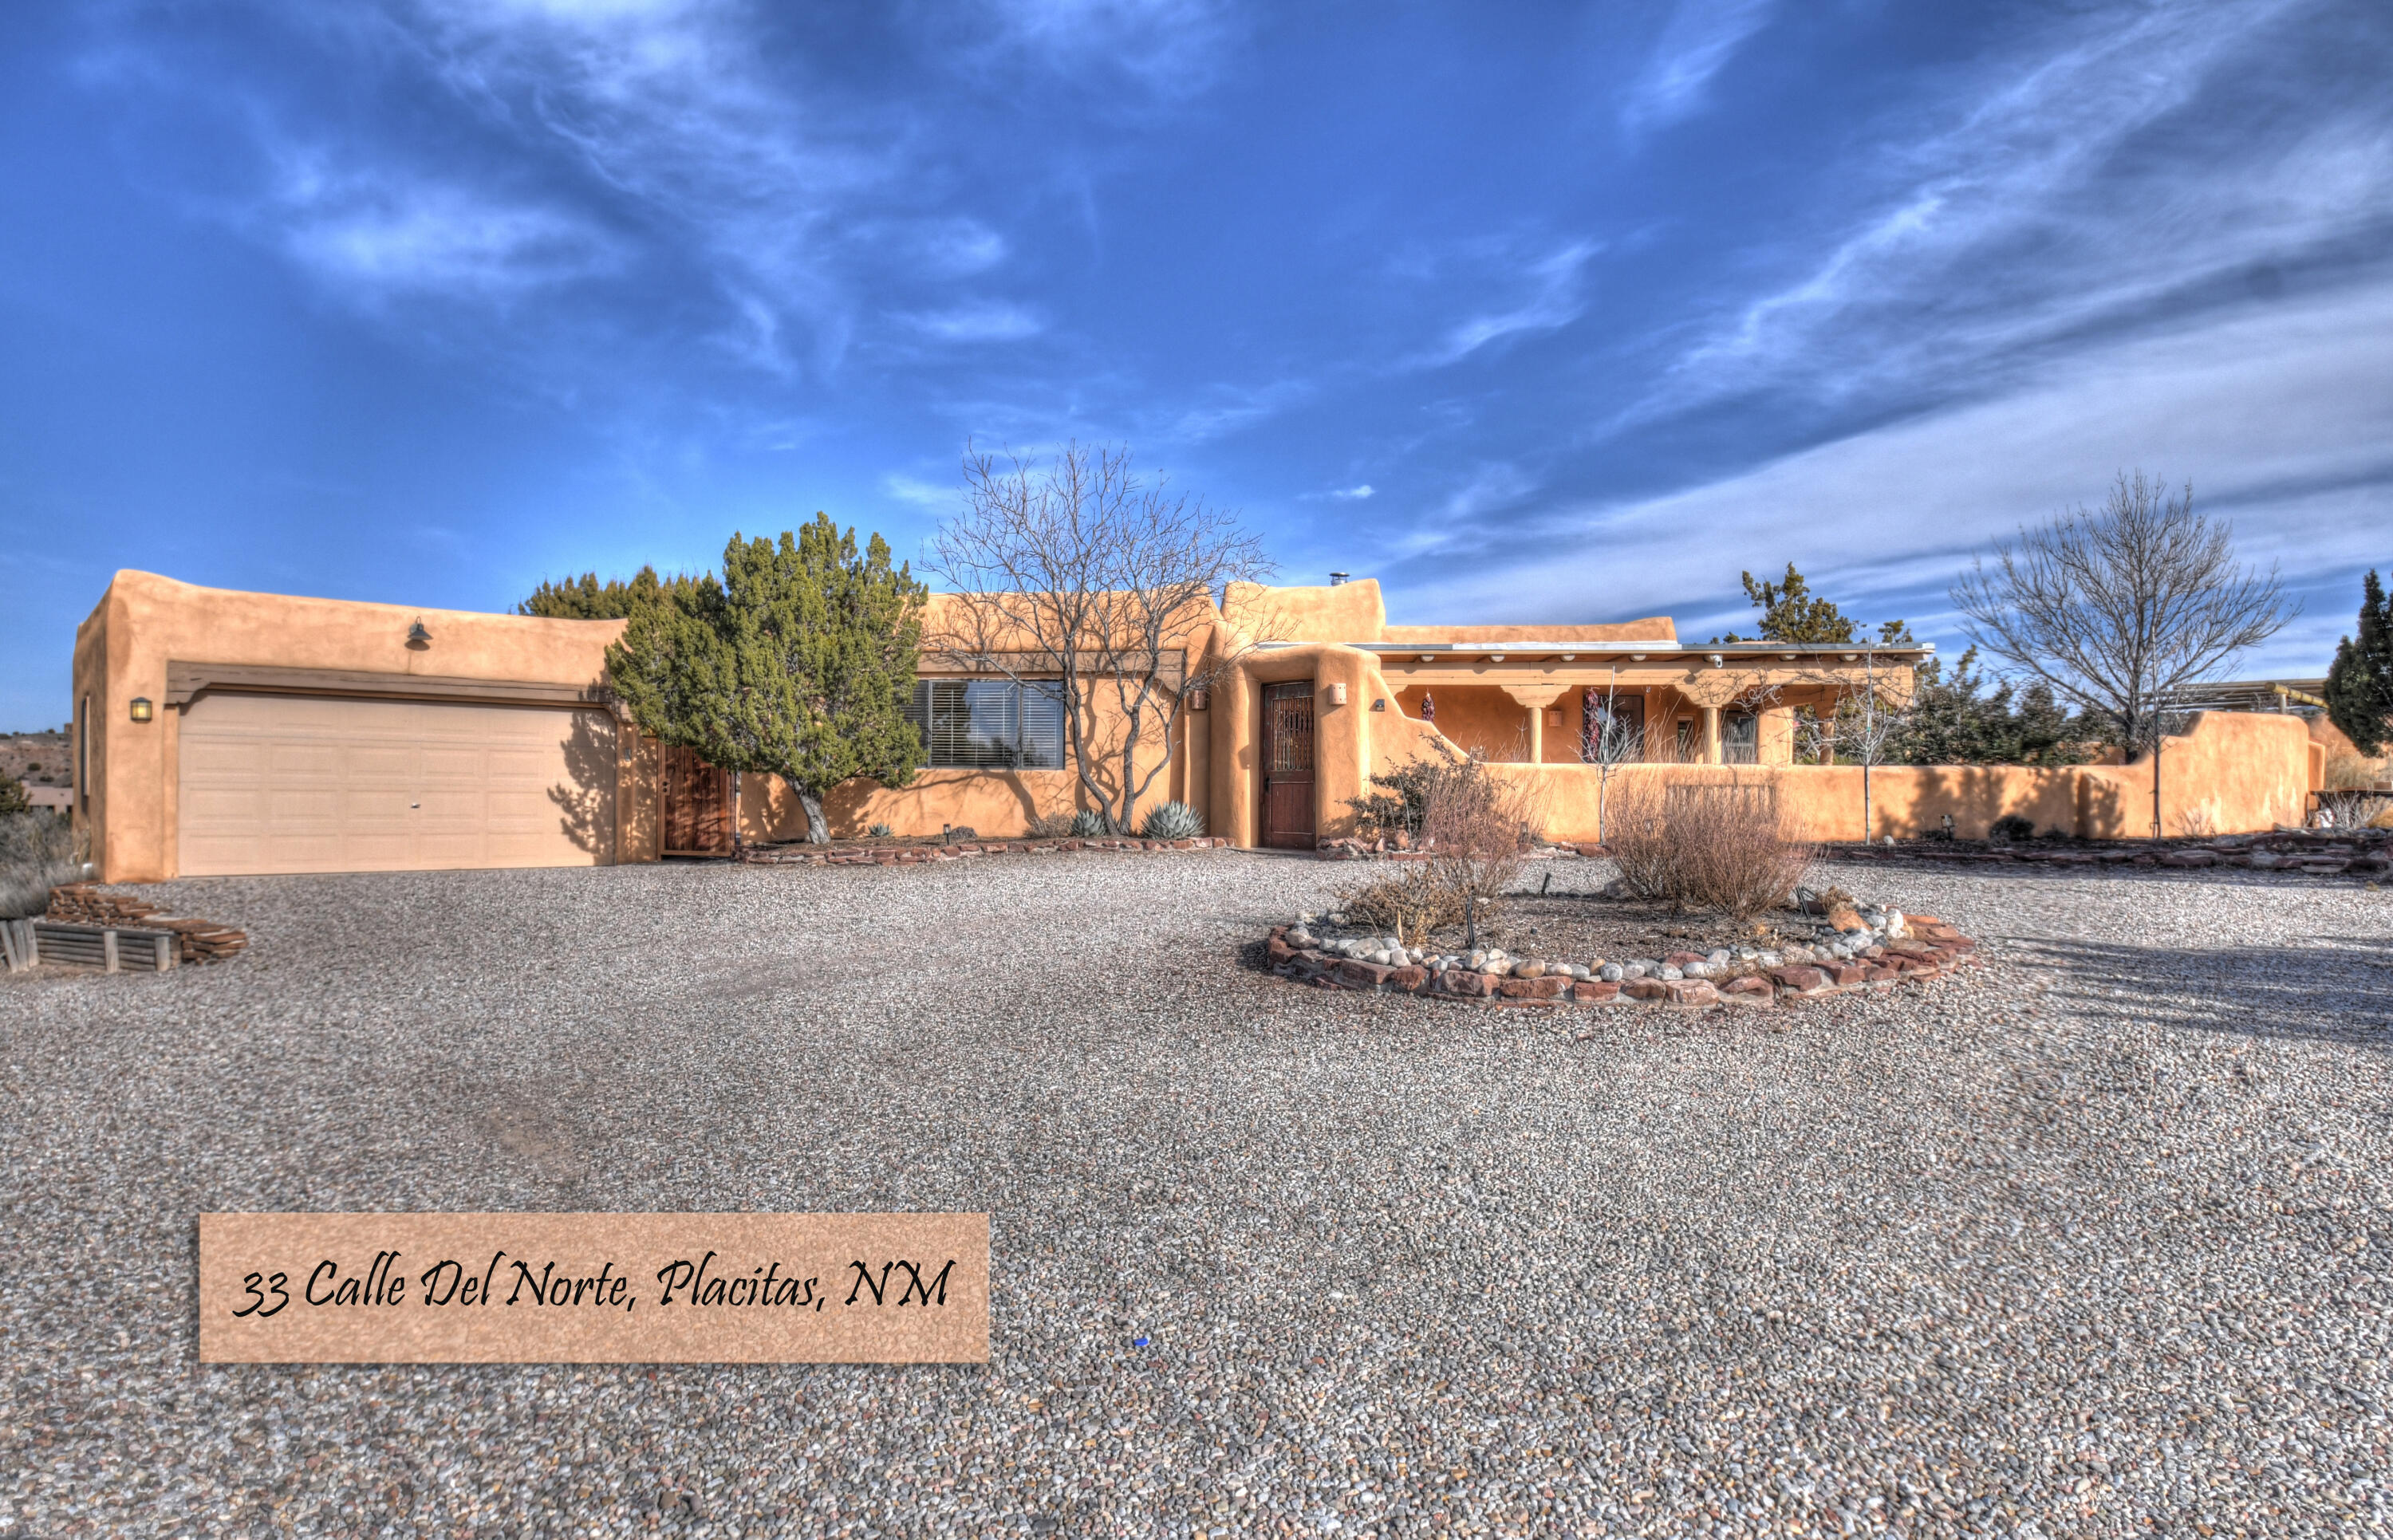 This stunning luxury southwestern home takes advantage of the incredible vistas afforded from this private and beautiful homesite.  This home is a 2 possible 3 bedroom with a 2 bedroom guest house.  The views are captivating.  Relax poolside in your private lap pool overlooking the dramatic landscape that includes two coy ponds as well as two covered patios including an outside Kiva fireplace. This single story floor plan offers a butlers pantry with a sub-zero wine cooler.  The laundry room also includes a workspace for your hobbies.  There is a mud room at the back entry.  28 owned solar panels provide  energy, making it almost totally off-the-grid.  Enjoy the dramatic night skies, beautiful sunsets and incredible views of the high desert landscape from this great home.